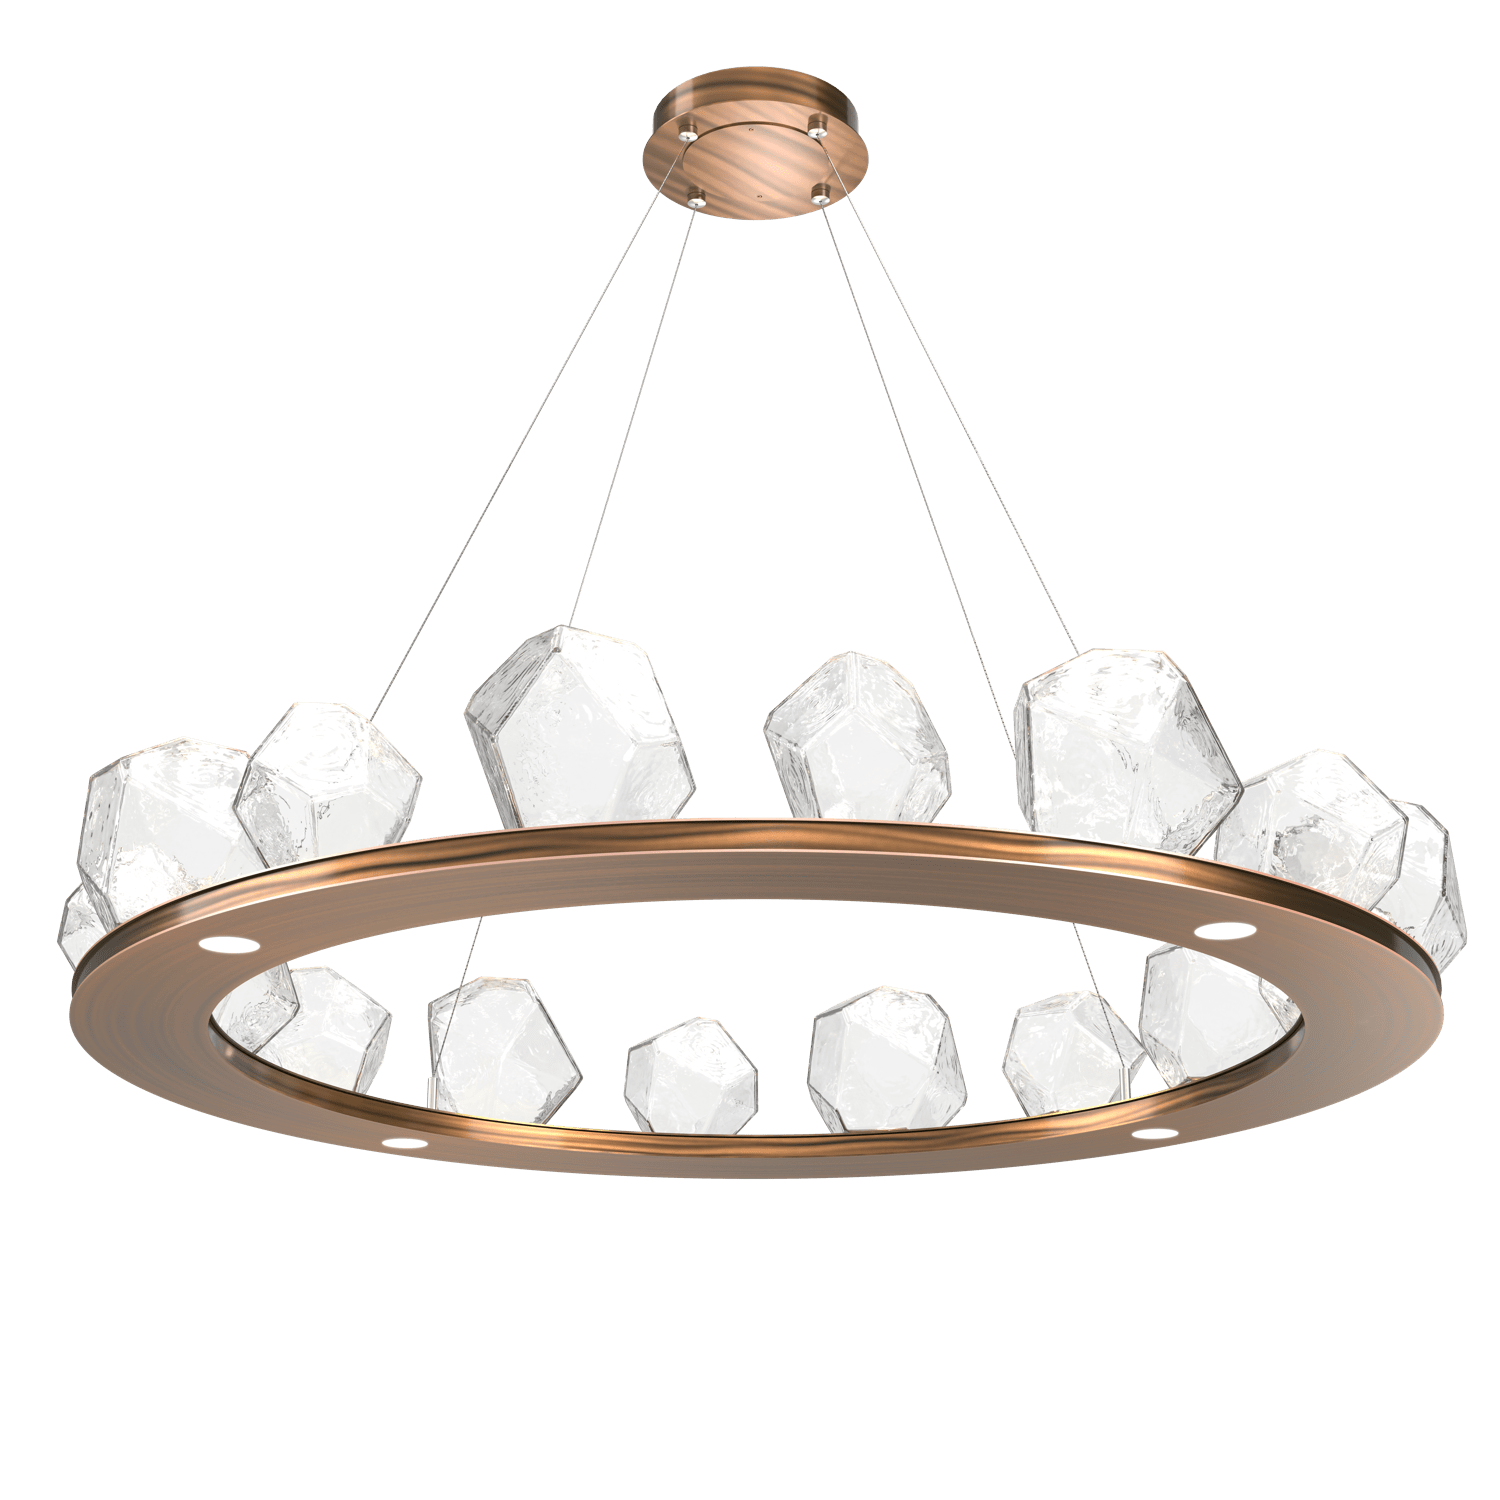 CHB0039-0D-RB-C-Hammerton-Studio-Gem-48-inch-ring-chandelier-with-oil-rubbed-bronze-finish-and-clear-blown-glass-shades-and-LED-lamping